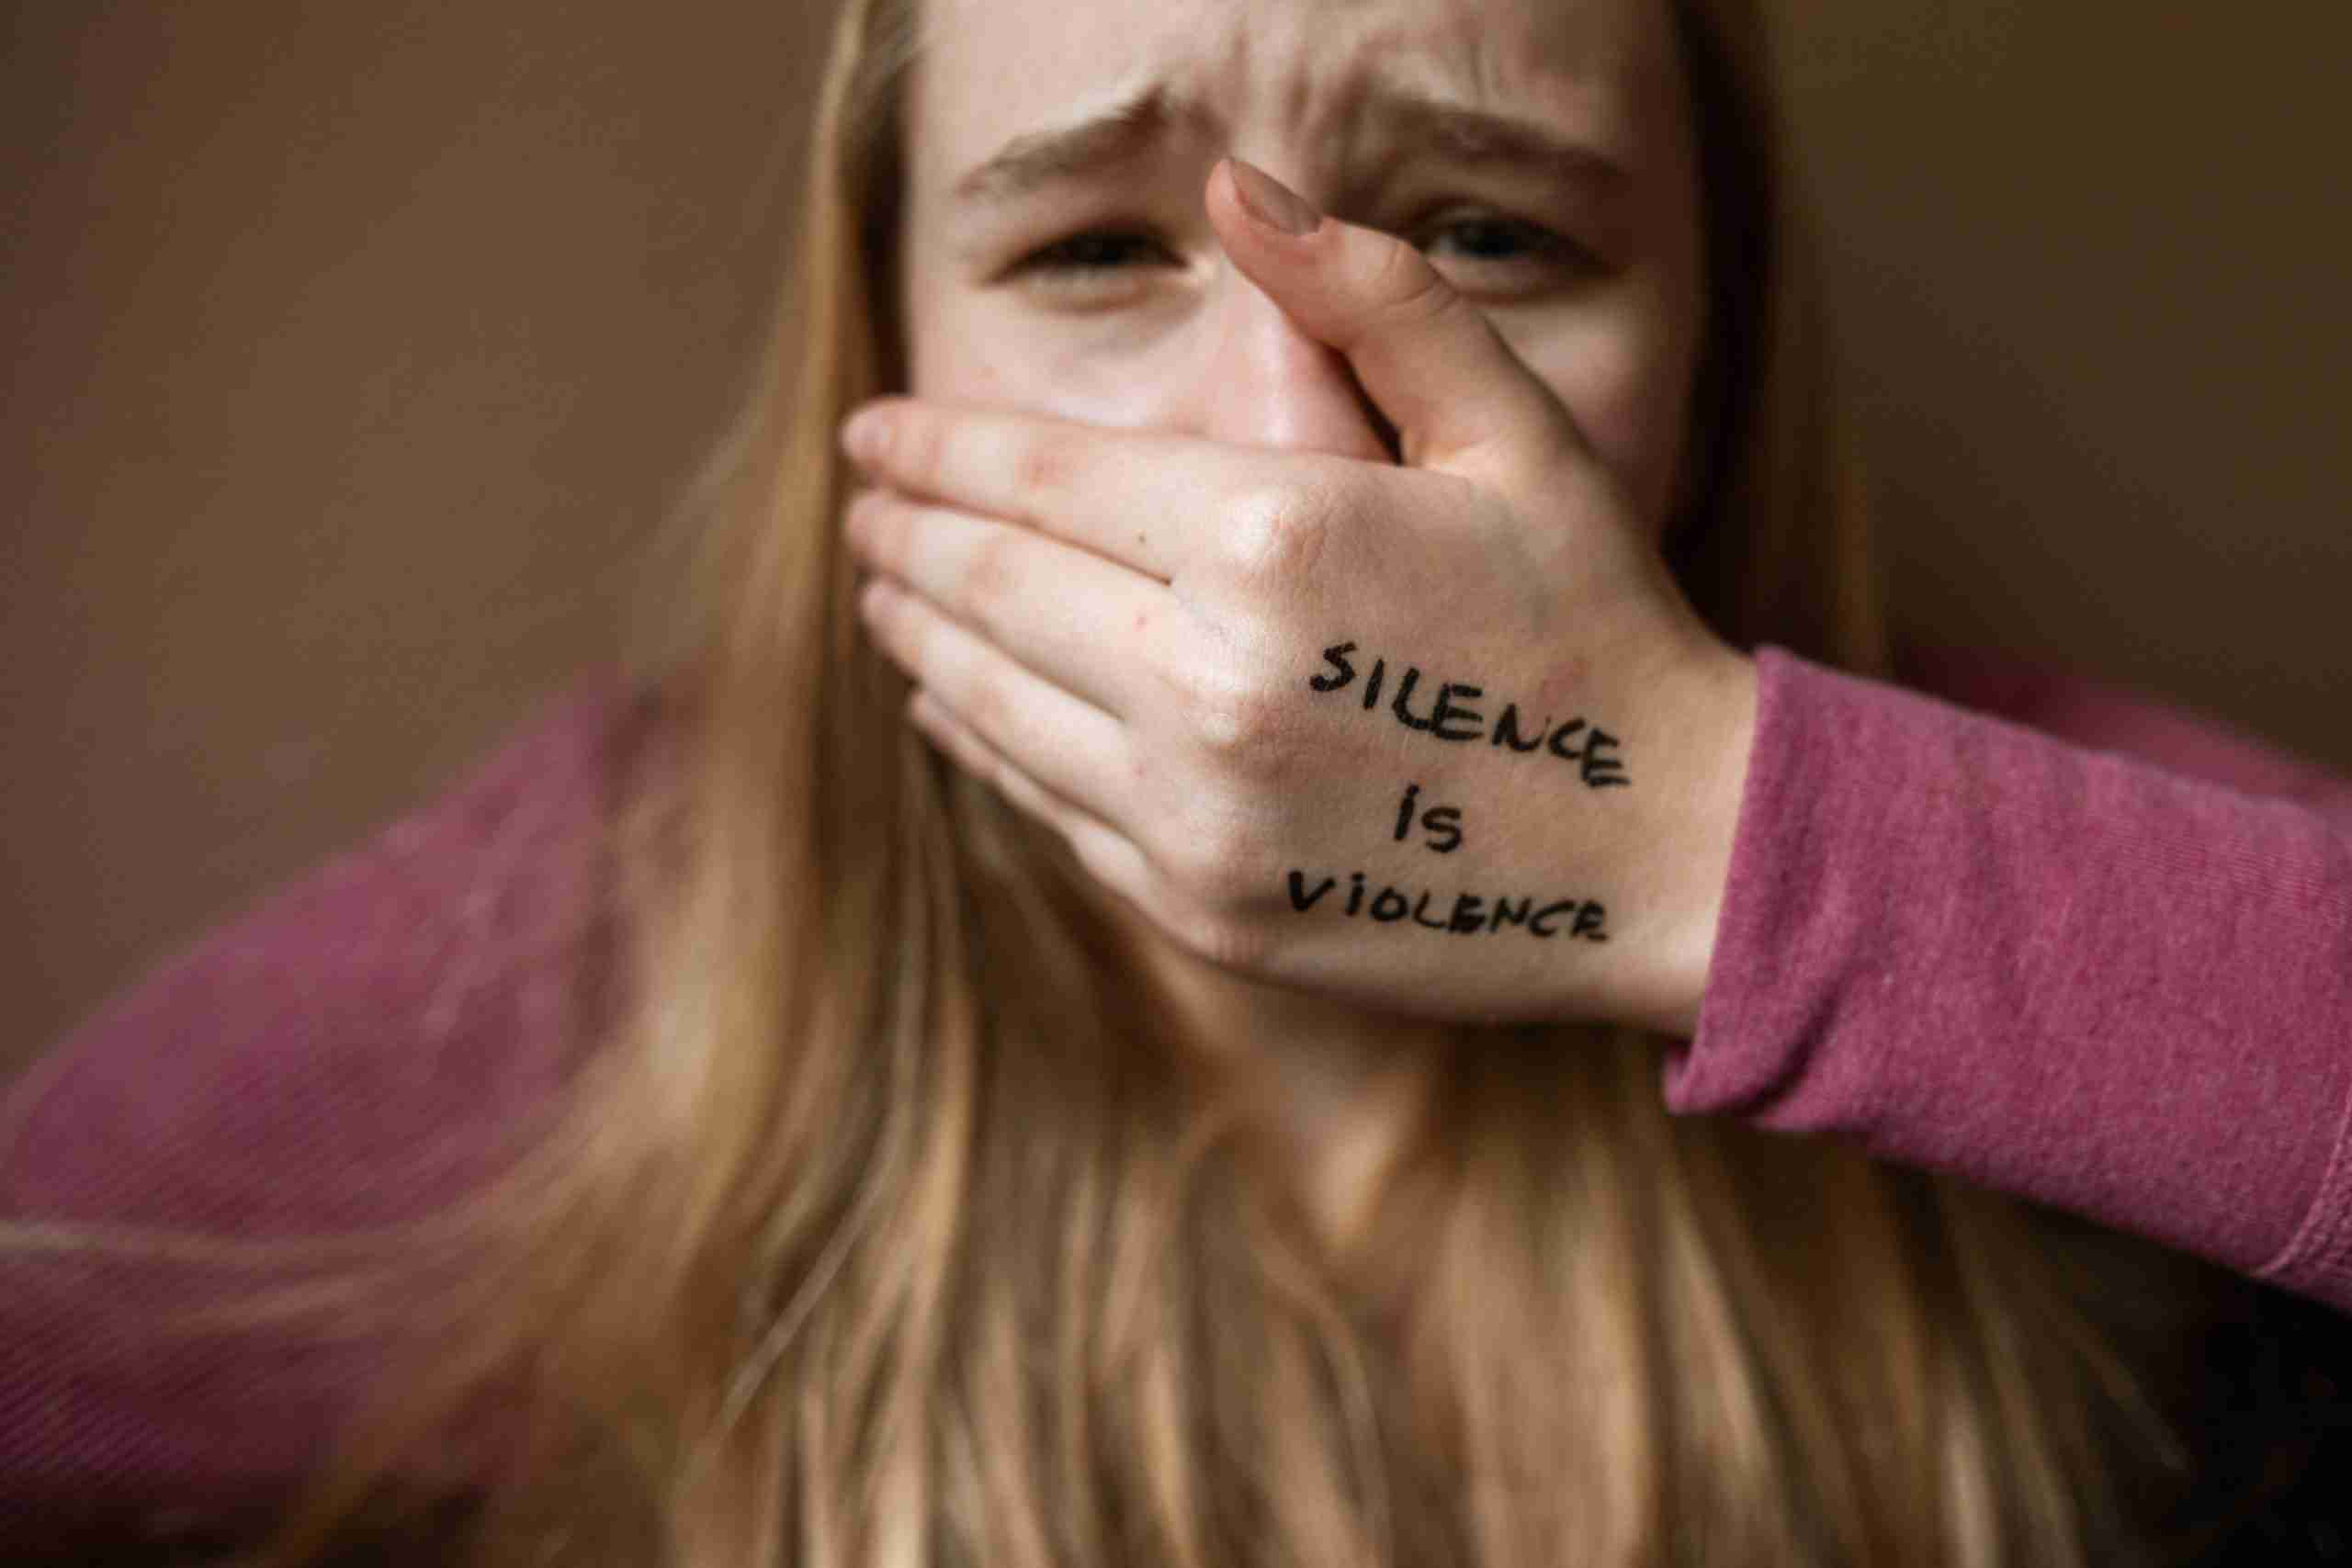 A woman holding her hand over her mouth with the words "Silence is violence" written on her hand